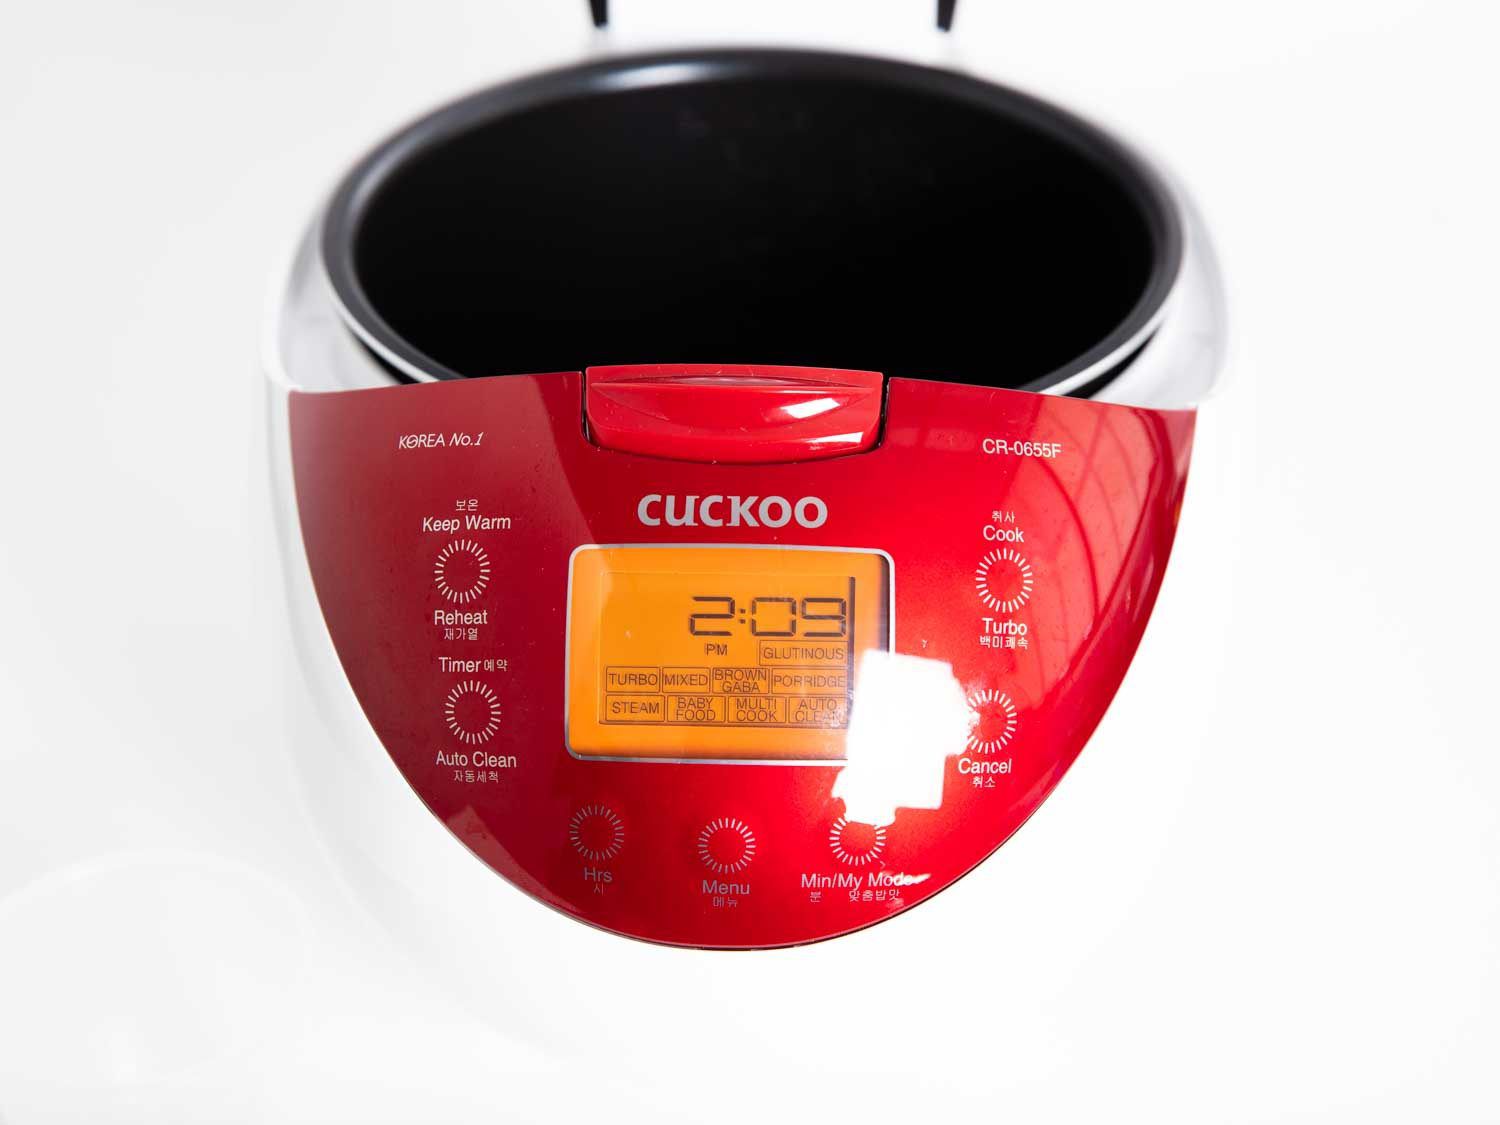 Close up view of control panel on Cuckoo CR 0655f rice cooker